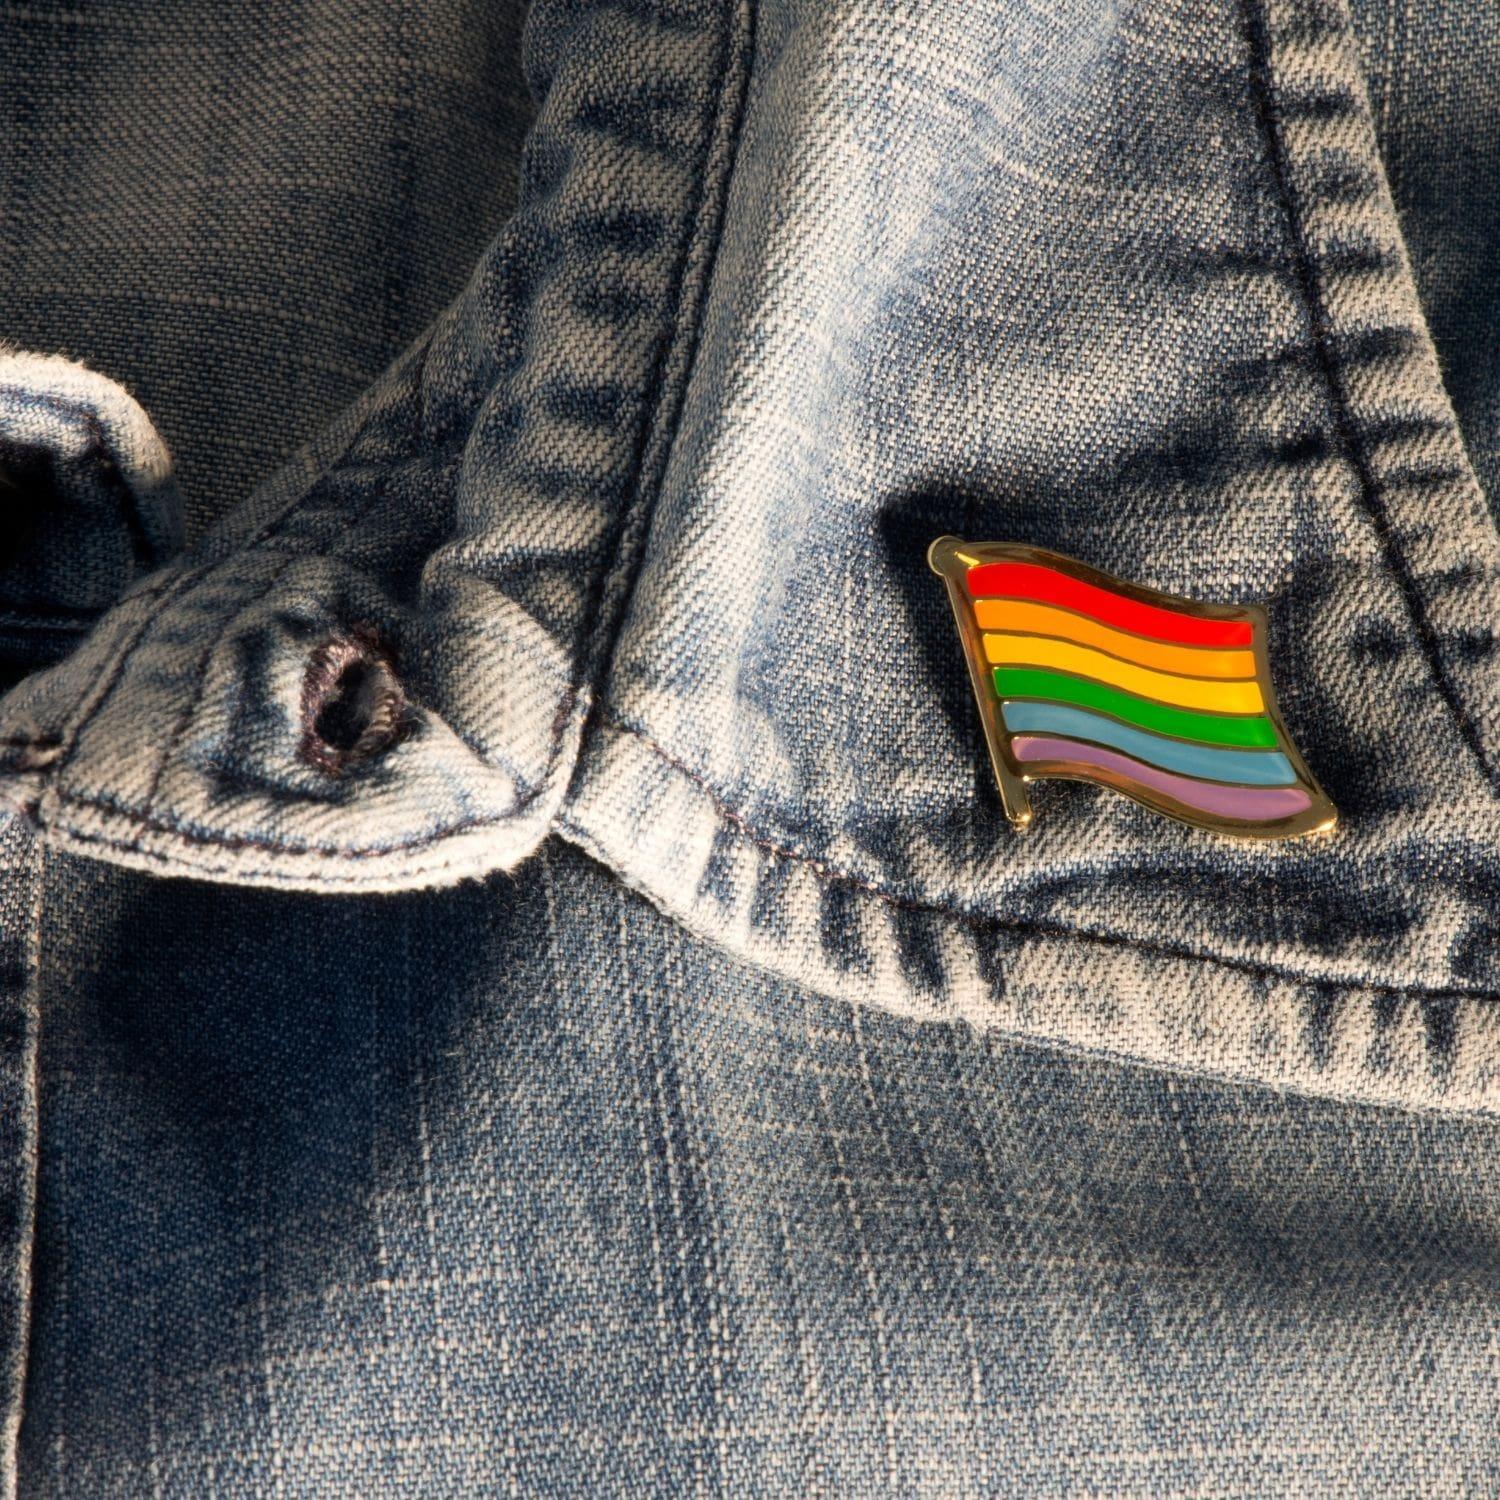 Product listing image of a TOMSCOUT LGBTQ+ Pride Metal Badge, pinned on a shirt, showcasing a symbol of pride and identity.